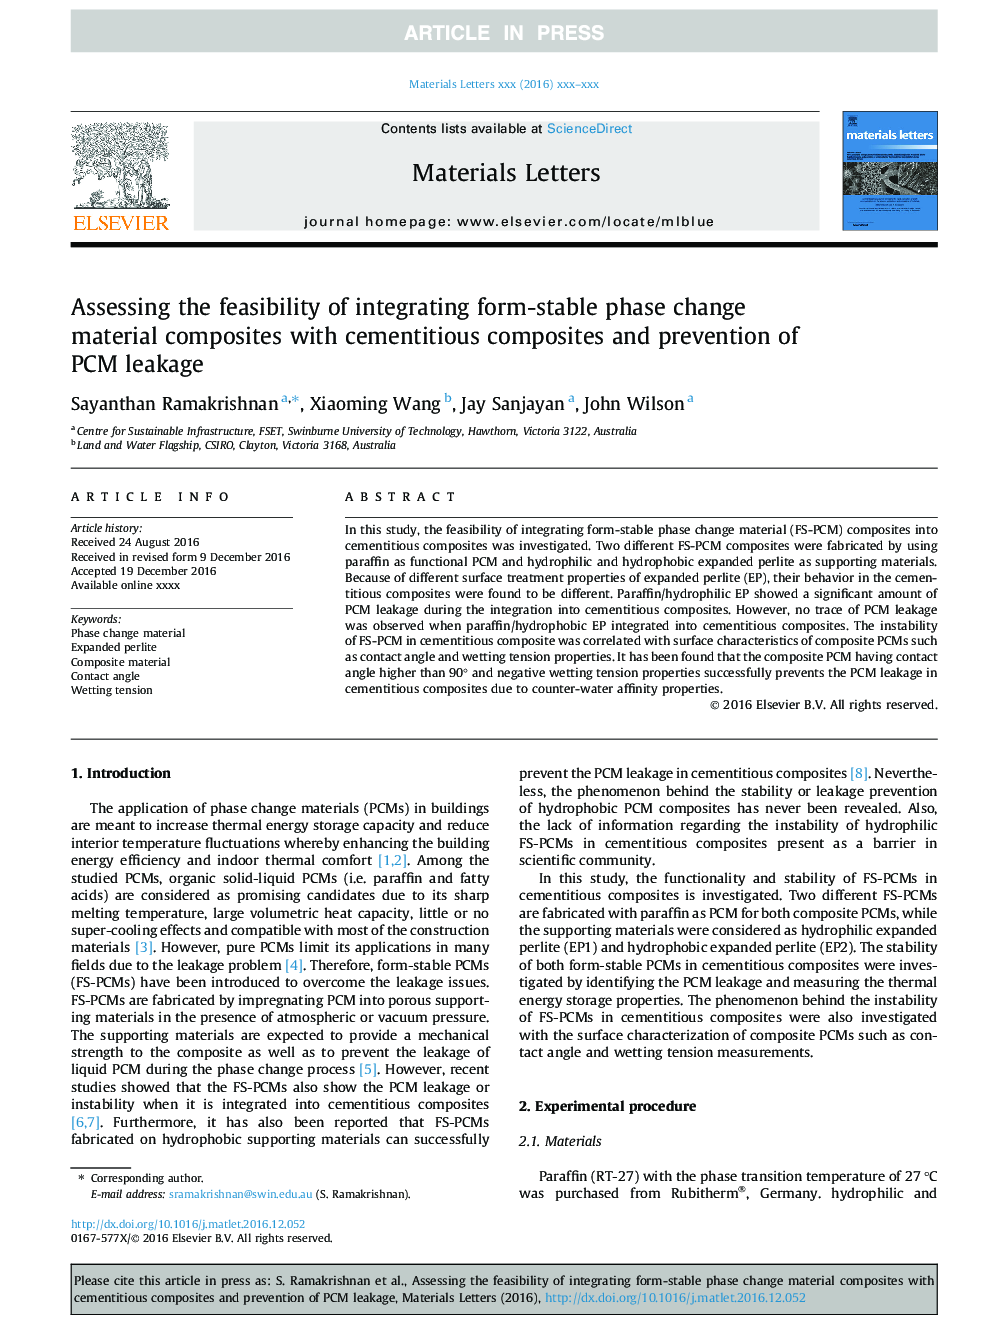 Assessing the feasibility of integrating form-stable phase change material composites with cementitious composites and prevention of PCM leakage